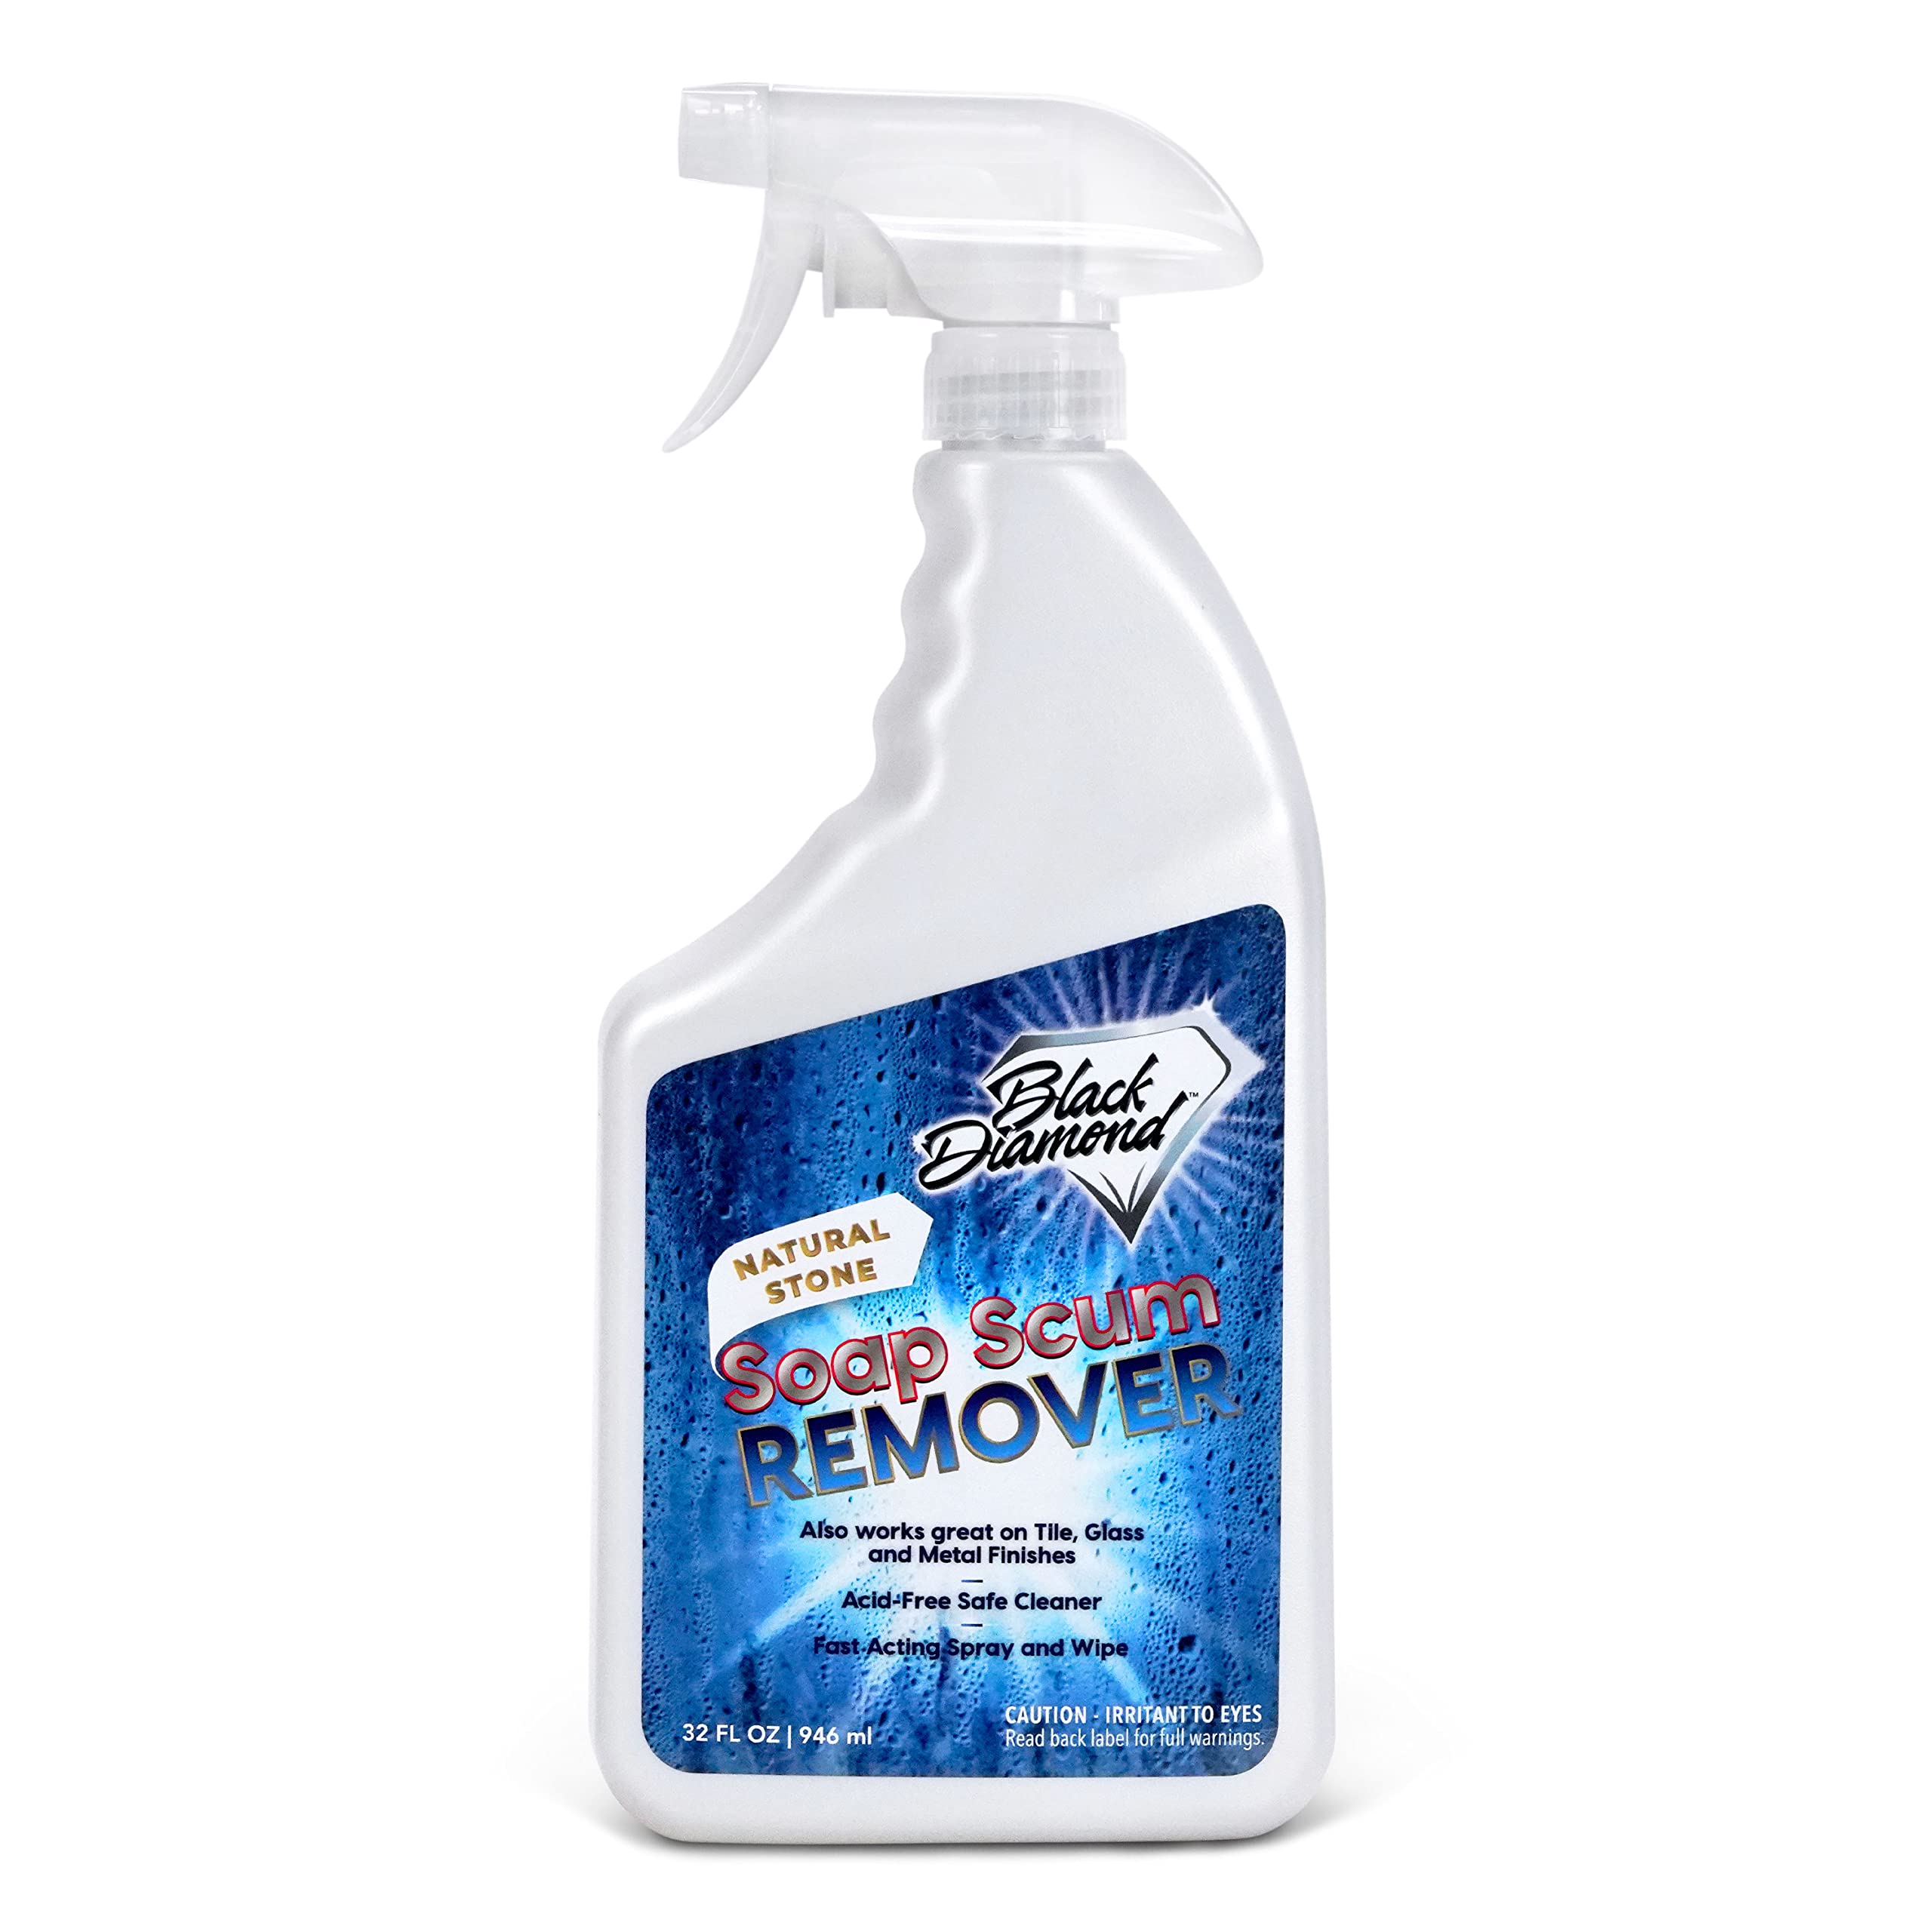 The 8 Best Soap Scum Removers